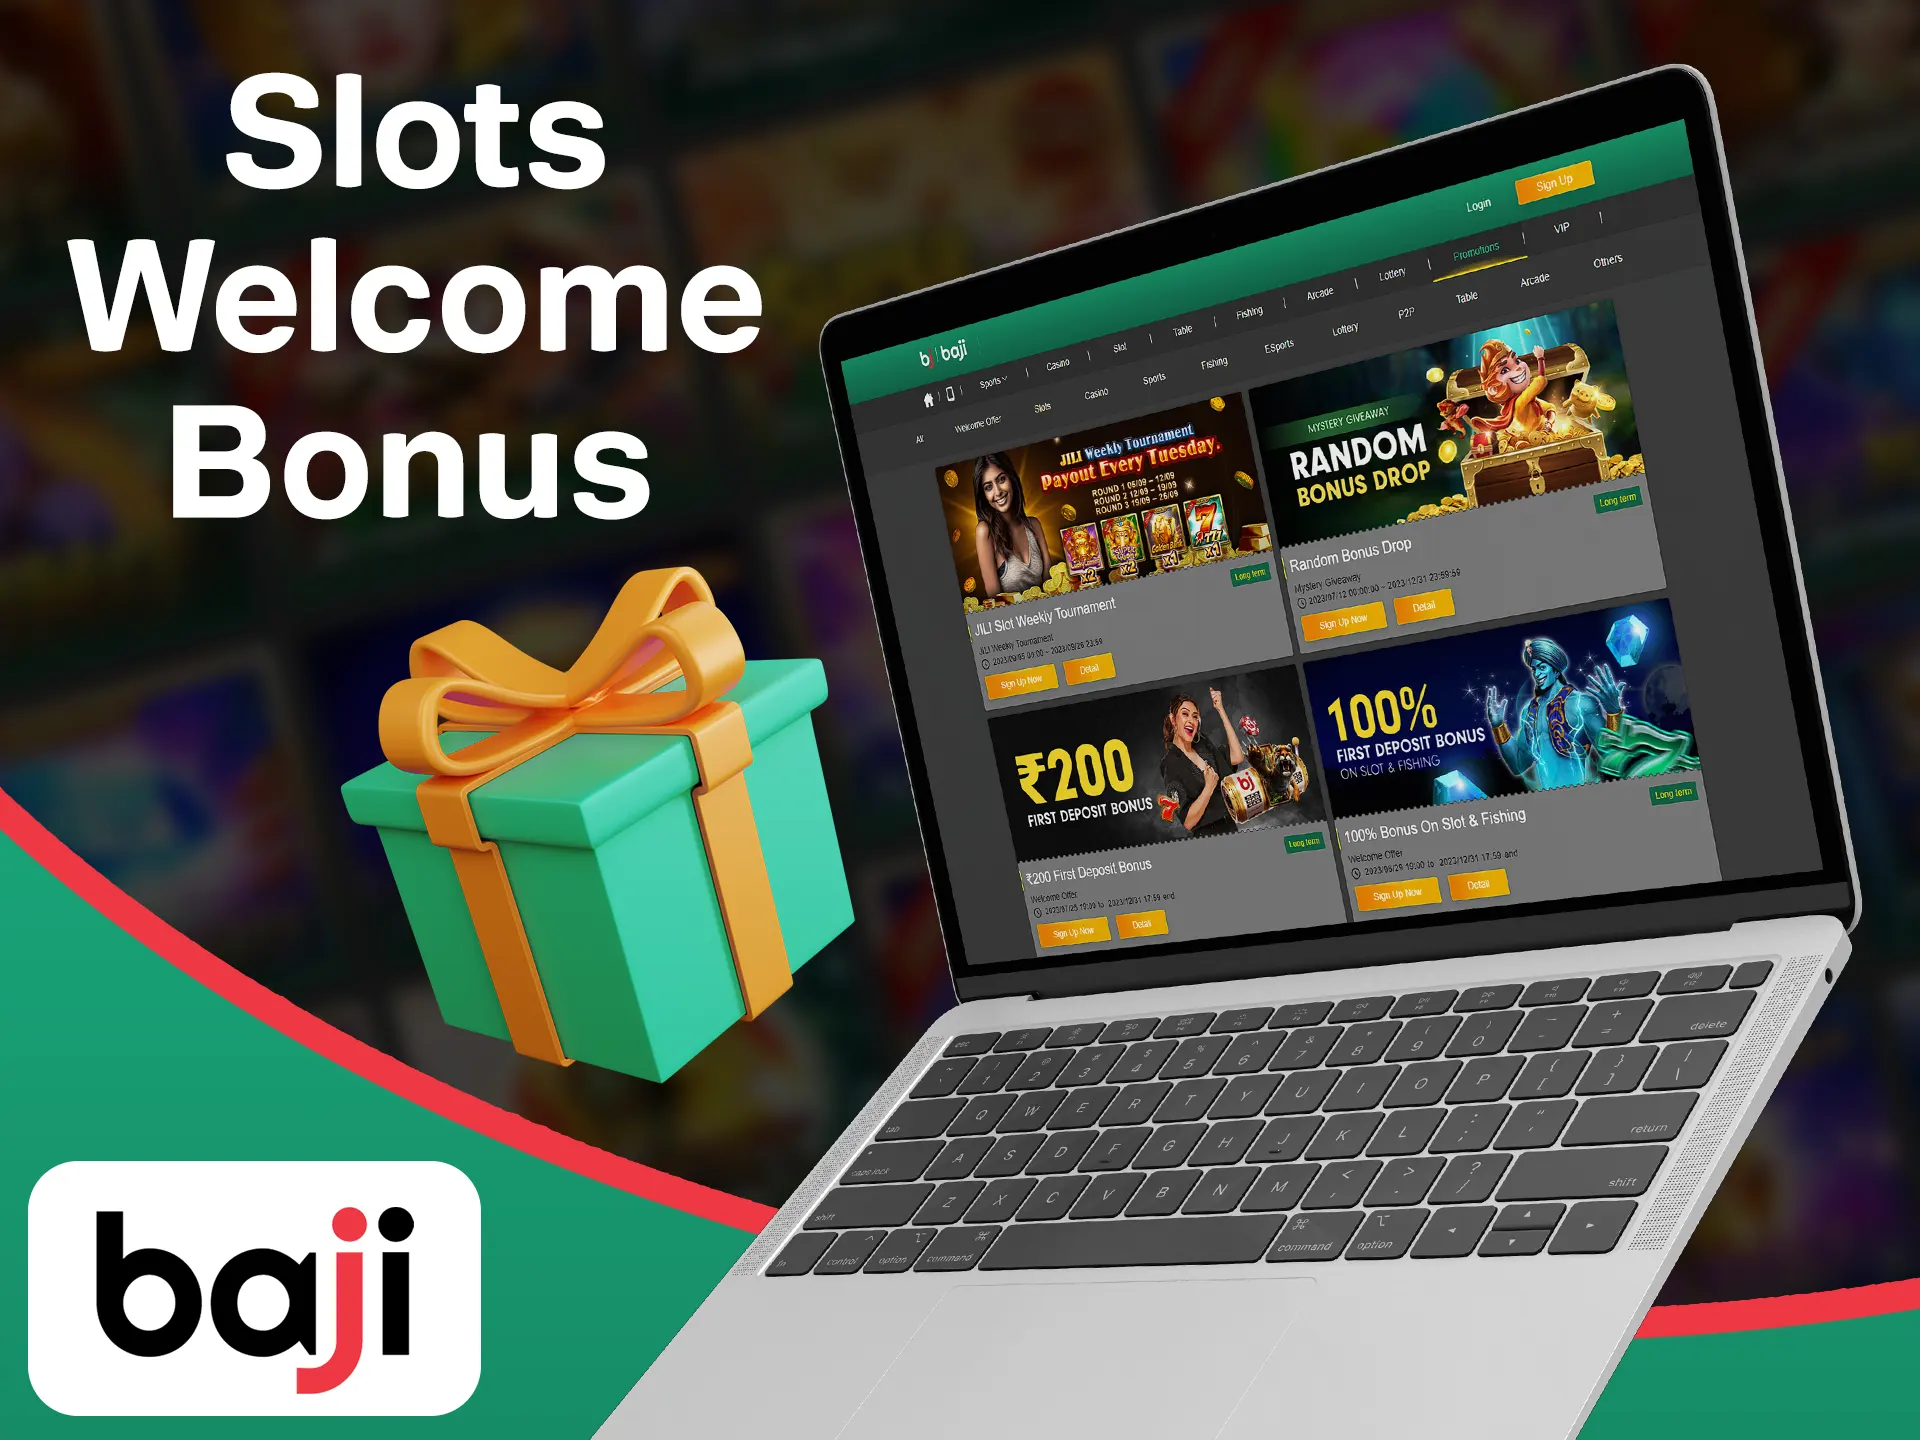 Get your free slots money with the special Baji bonus.